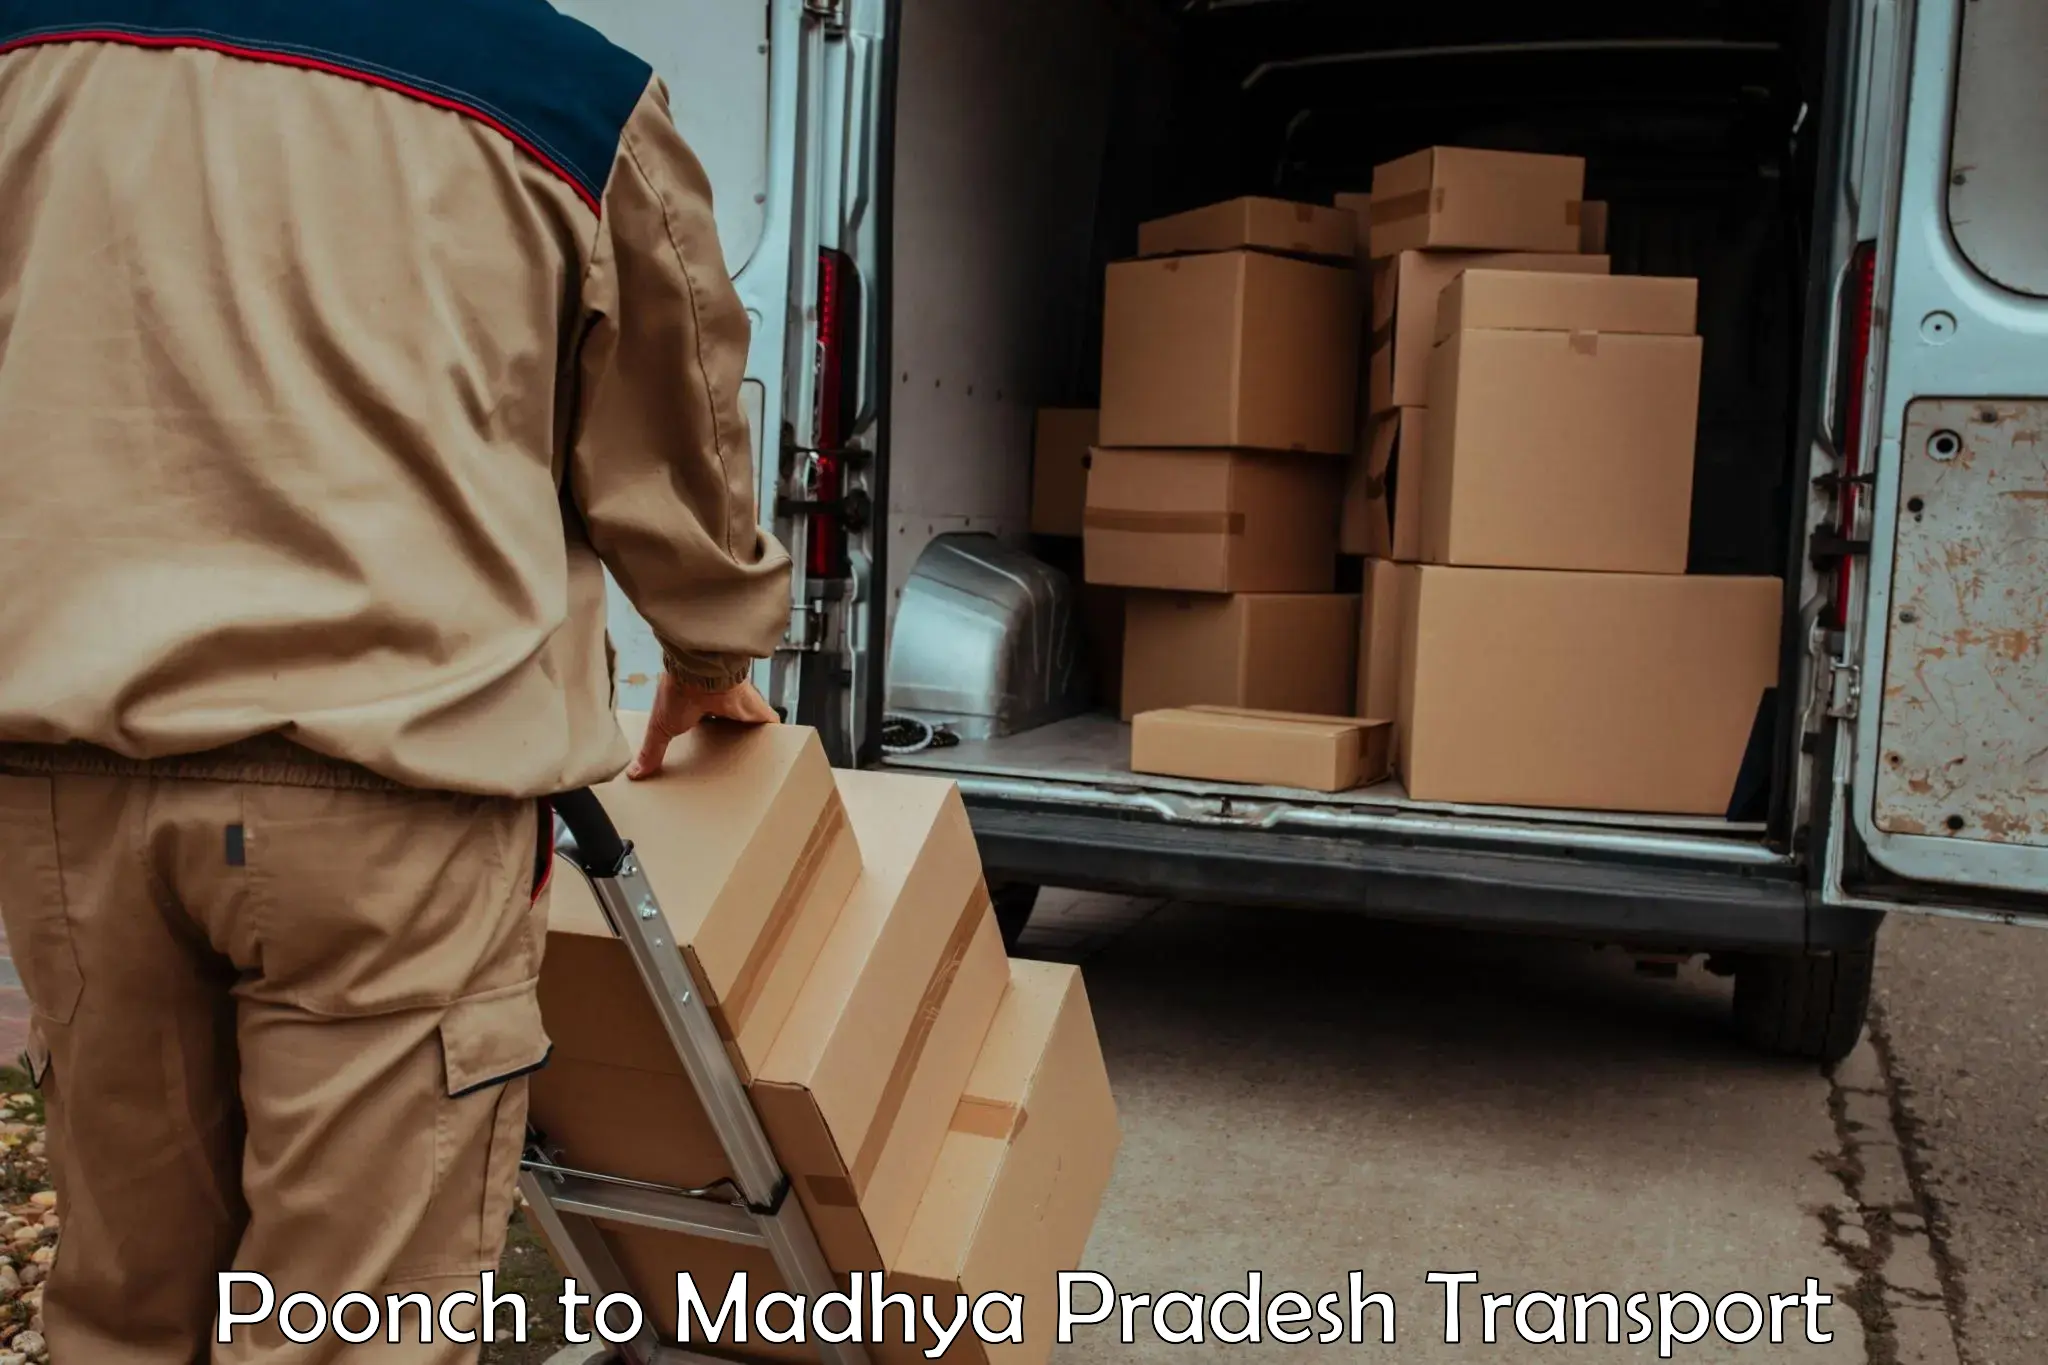 Daily parcel service transport Poonch to Ranchha